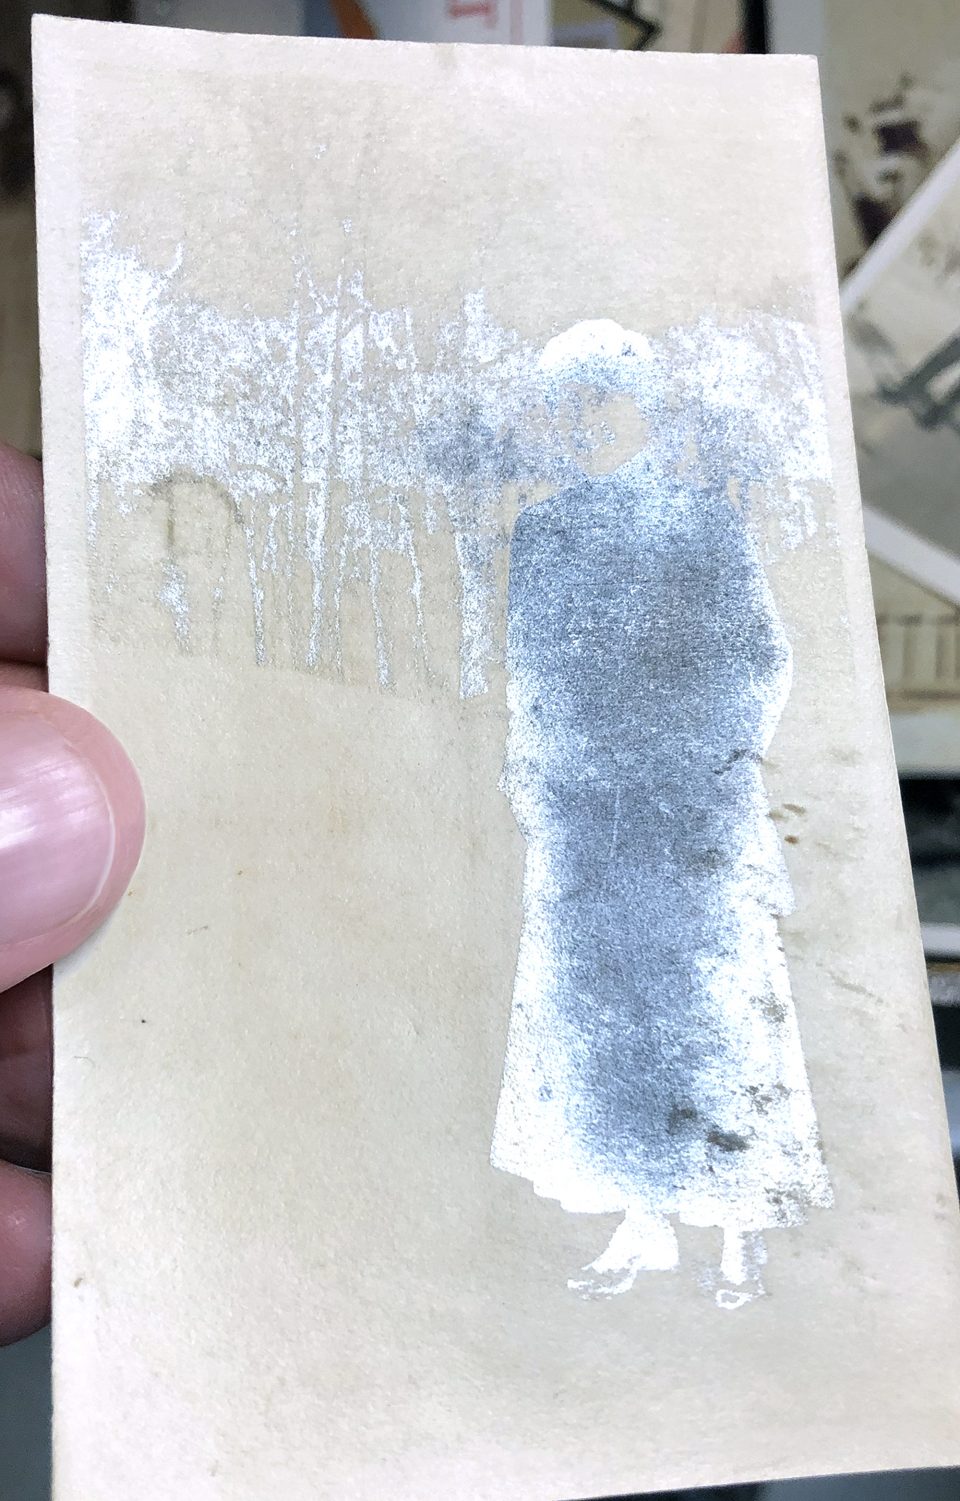 When turned to the light, this turn-of-the-century snapshot of a lady standing in the snow shows the distinct symptoms of silver mirroring decay.